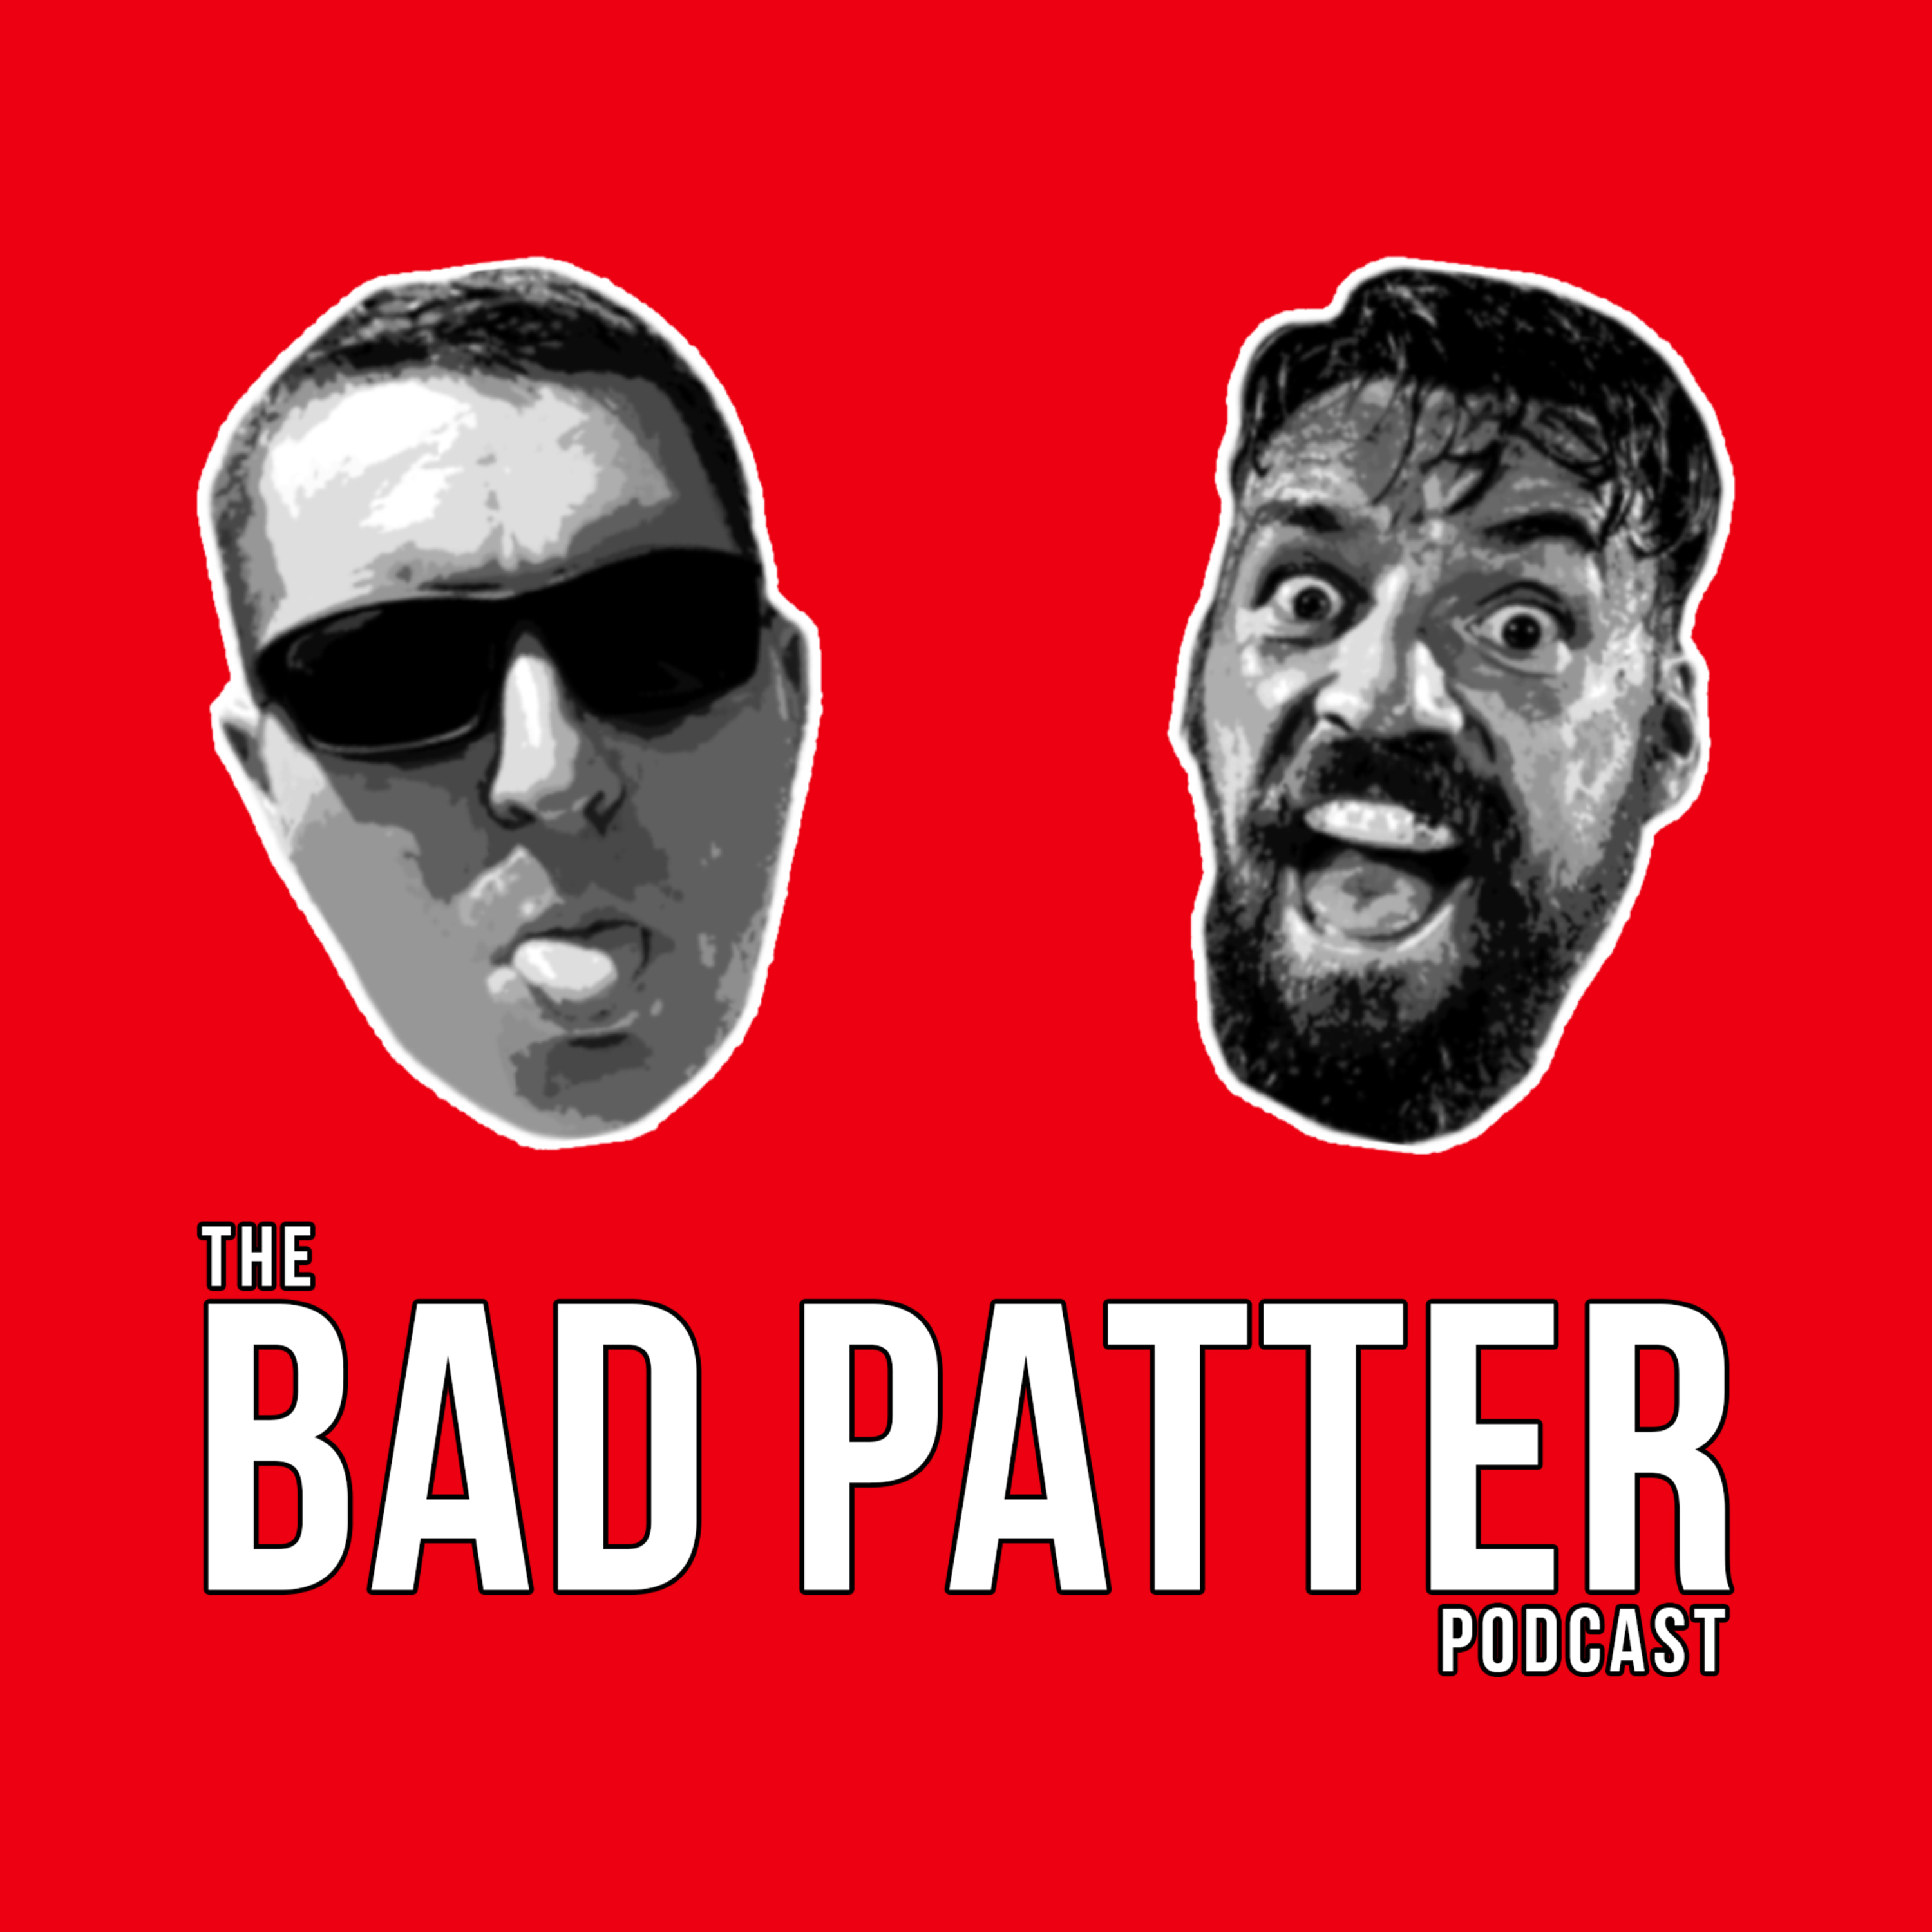 The Bad Patter Podcast